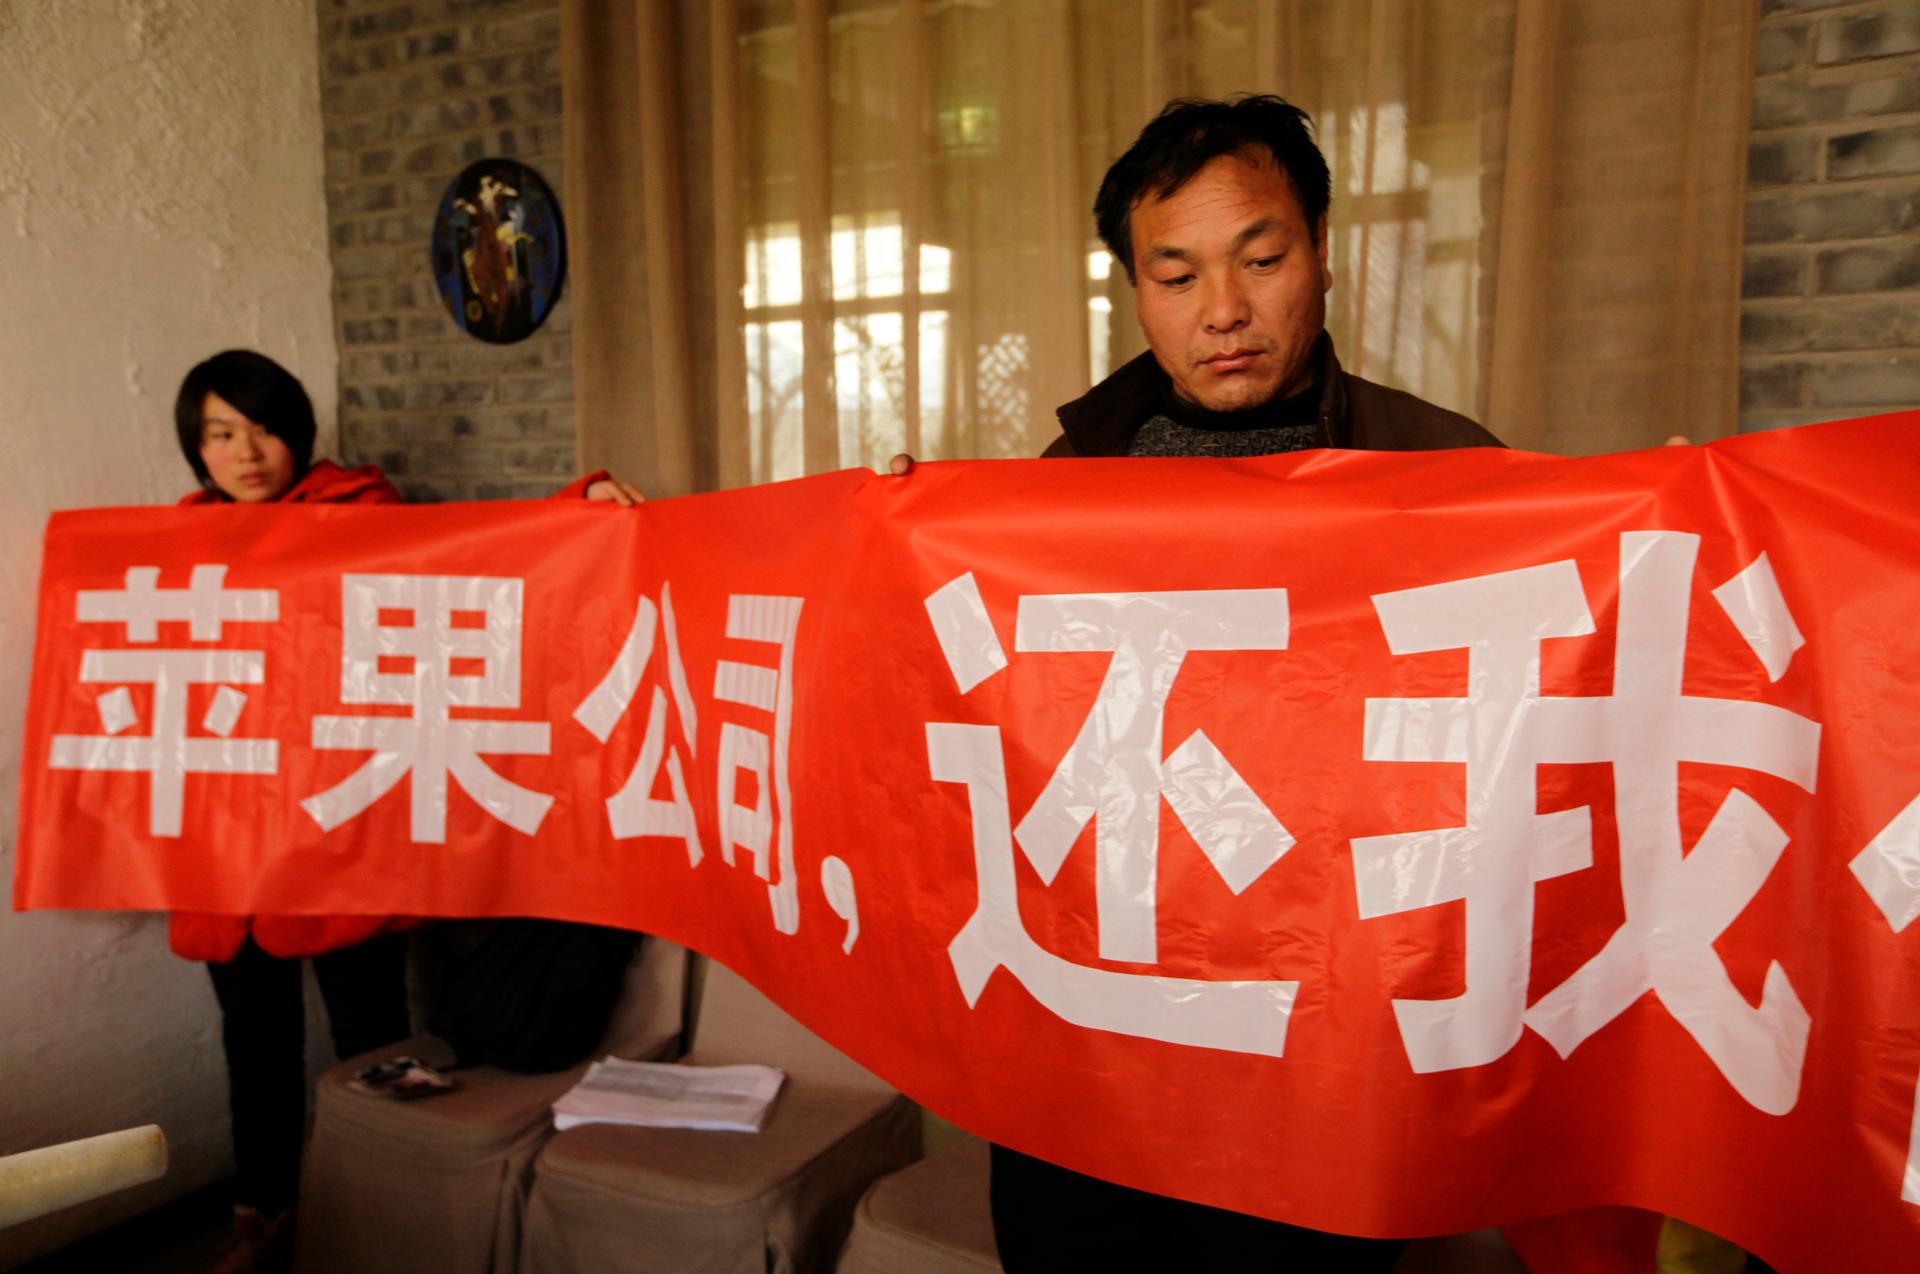 Shi Zengqiang, on the right, the father of a 15-year-old worker at Chinese manufacturing company Pegatron worker who died of pneumonia, holds a banner at a news conference in Beijing on December 16, 2013.